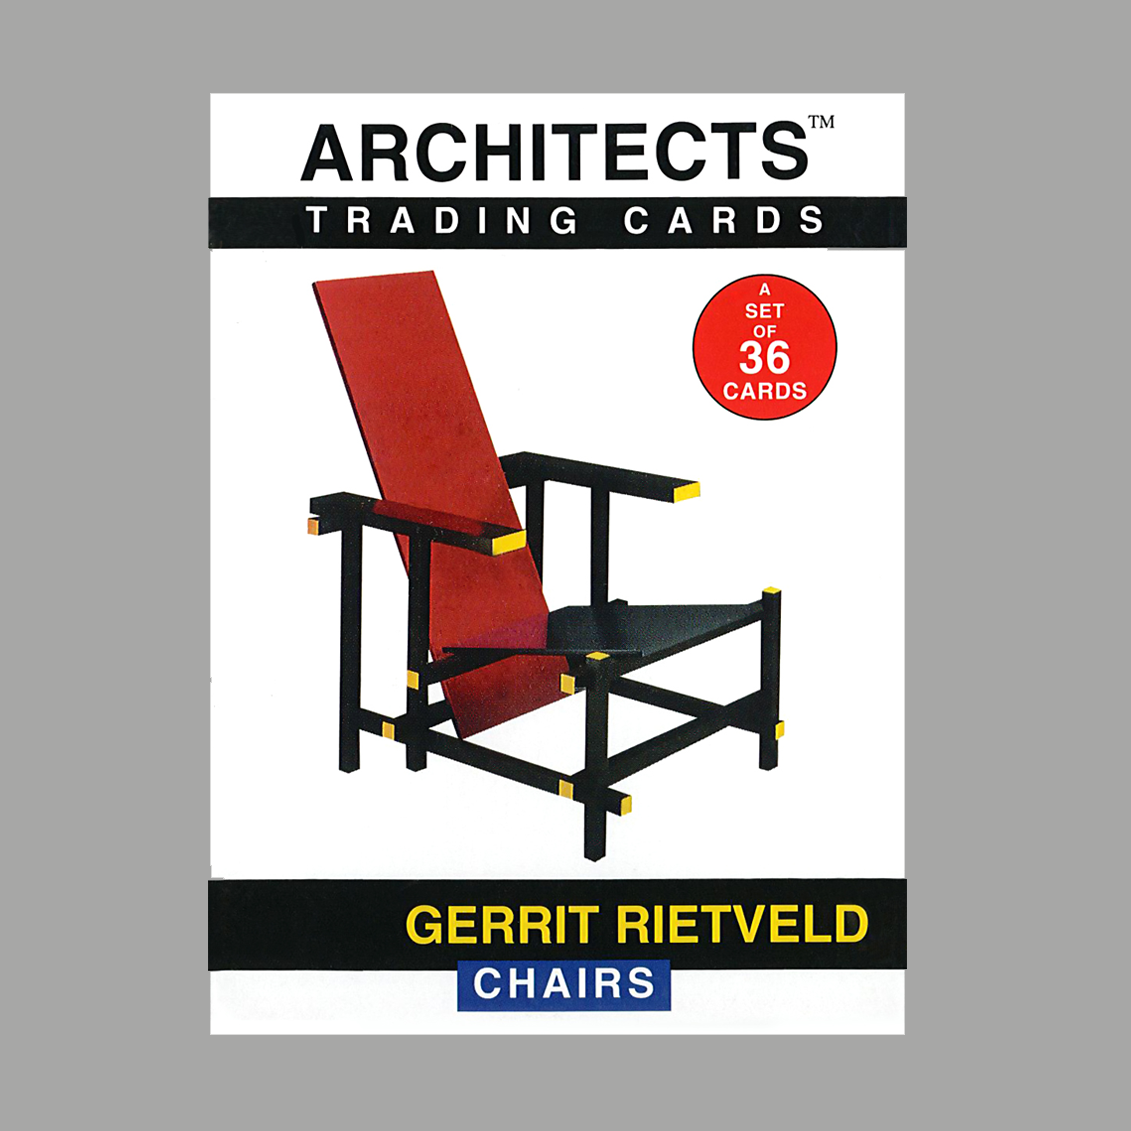 "Architects" Trading Cards